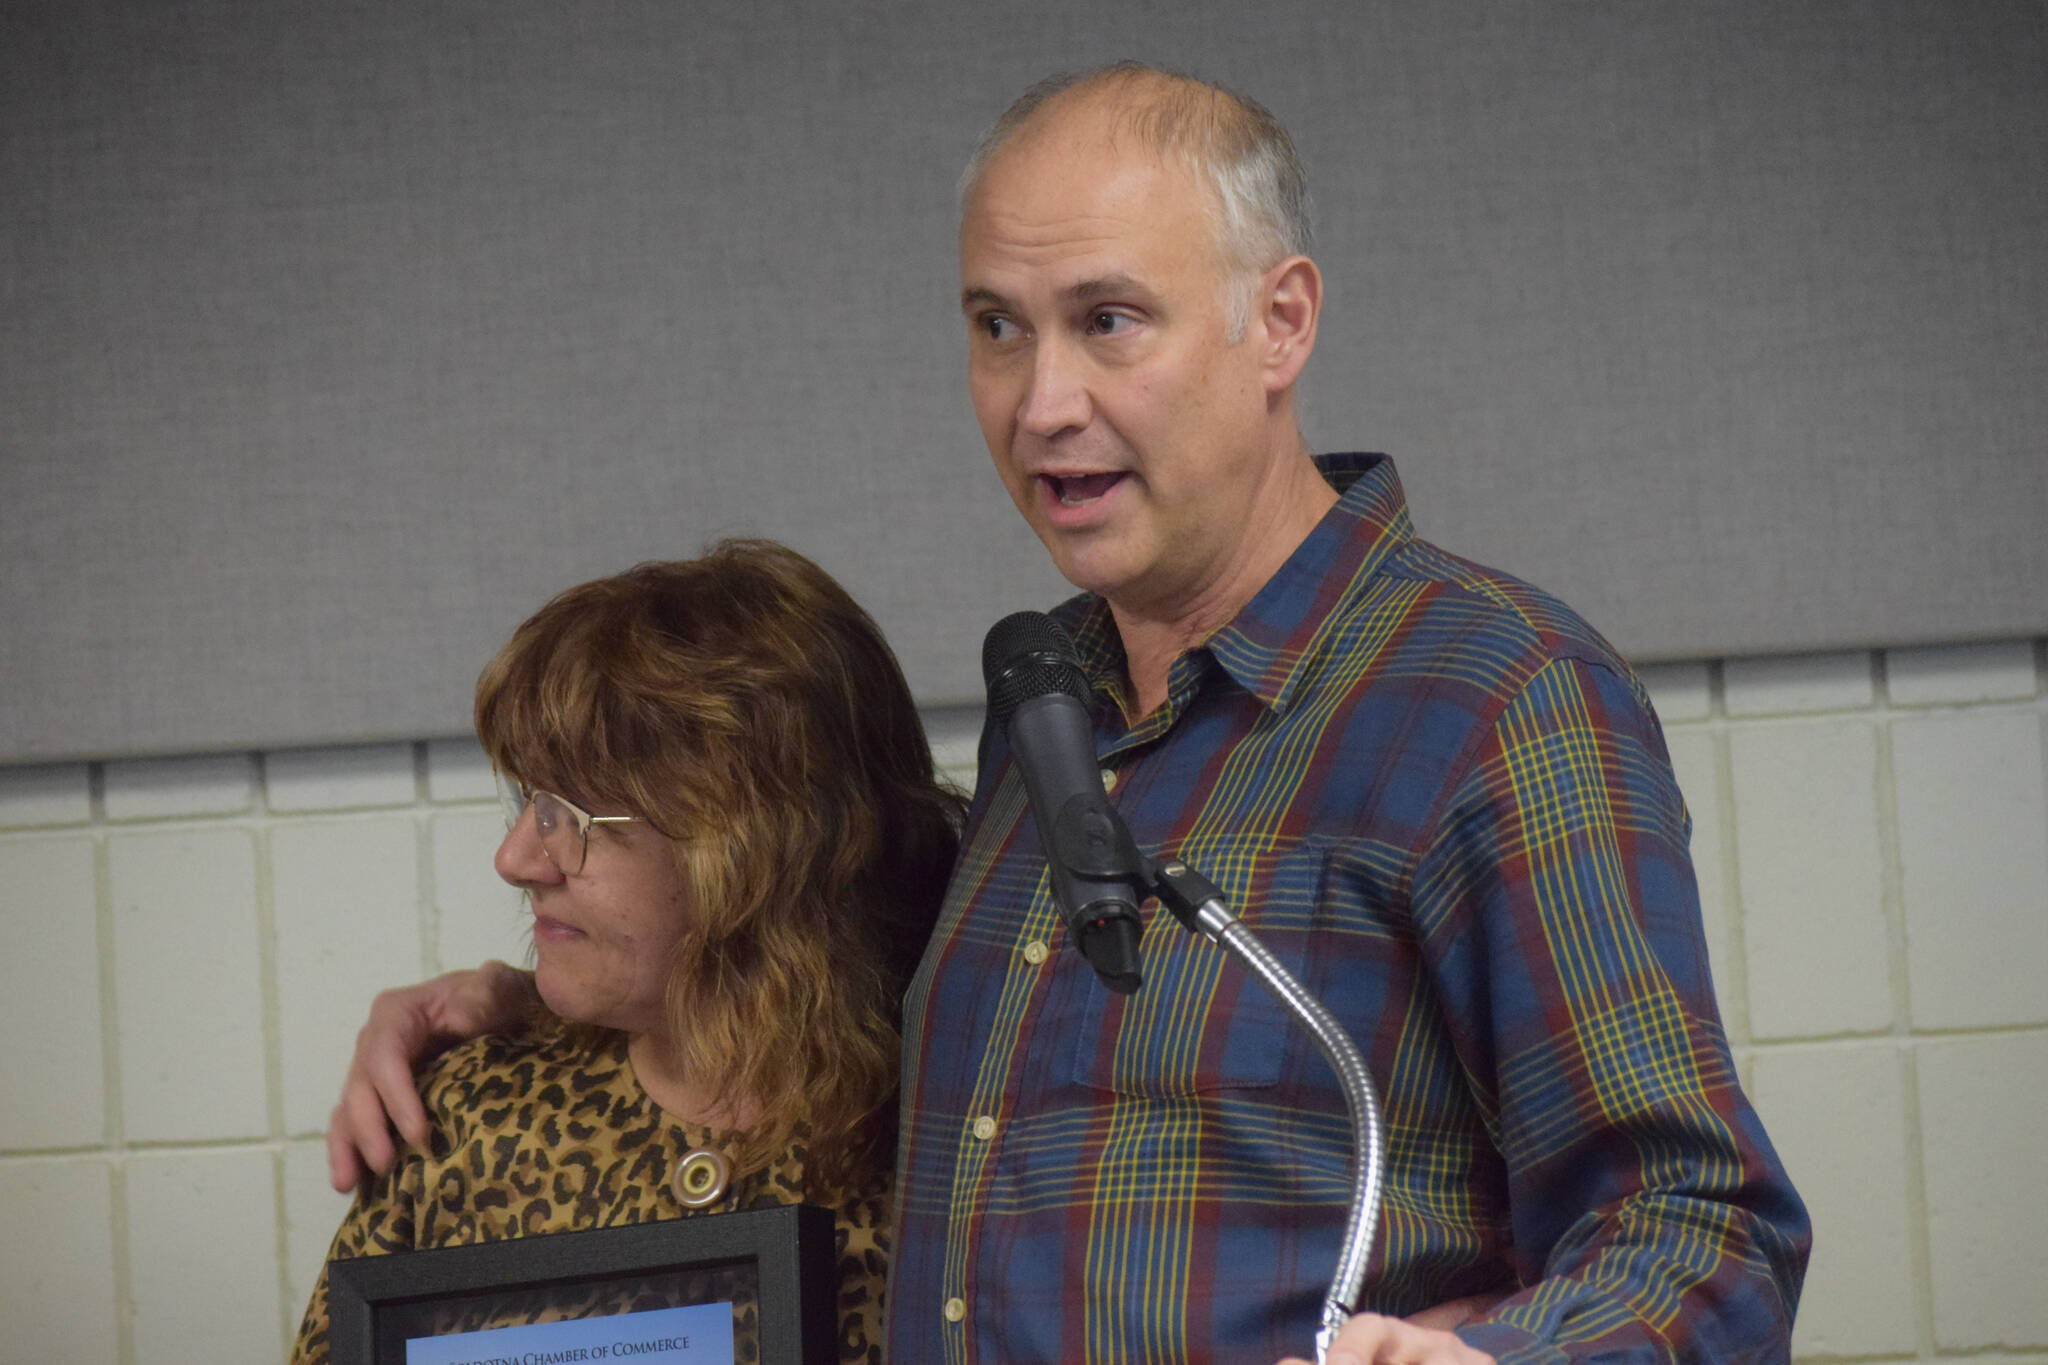 Mary Krull, with husband Henry Krull, accept the Soldotna Chamber of Commerces business of the year award for their work at Brew 602 and Addie Camp during the chambers 2021 award ceremony at the Soldotna Regional Sports Complex on Wednesday, Feb. 9, 2022. (Camille Botello/Peninsula Clarion)